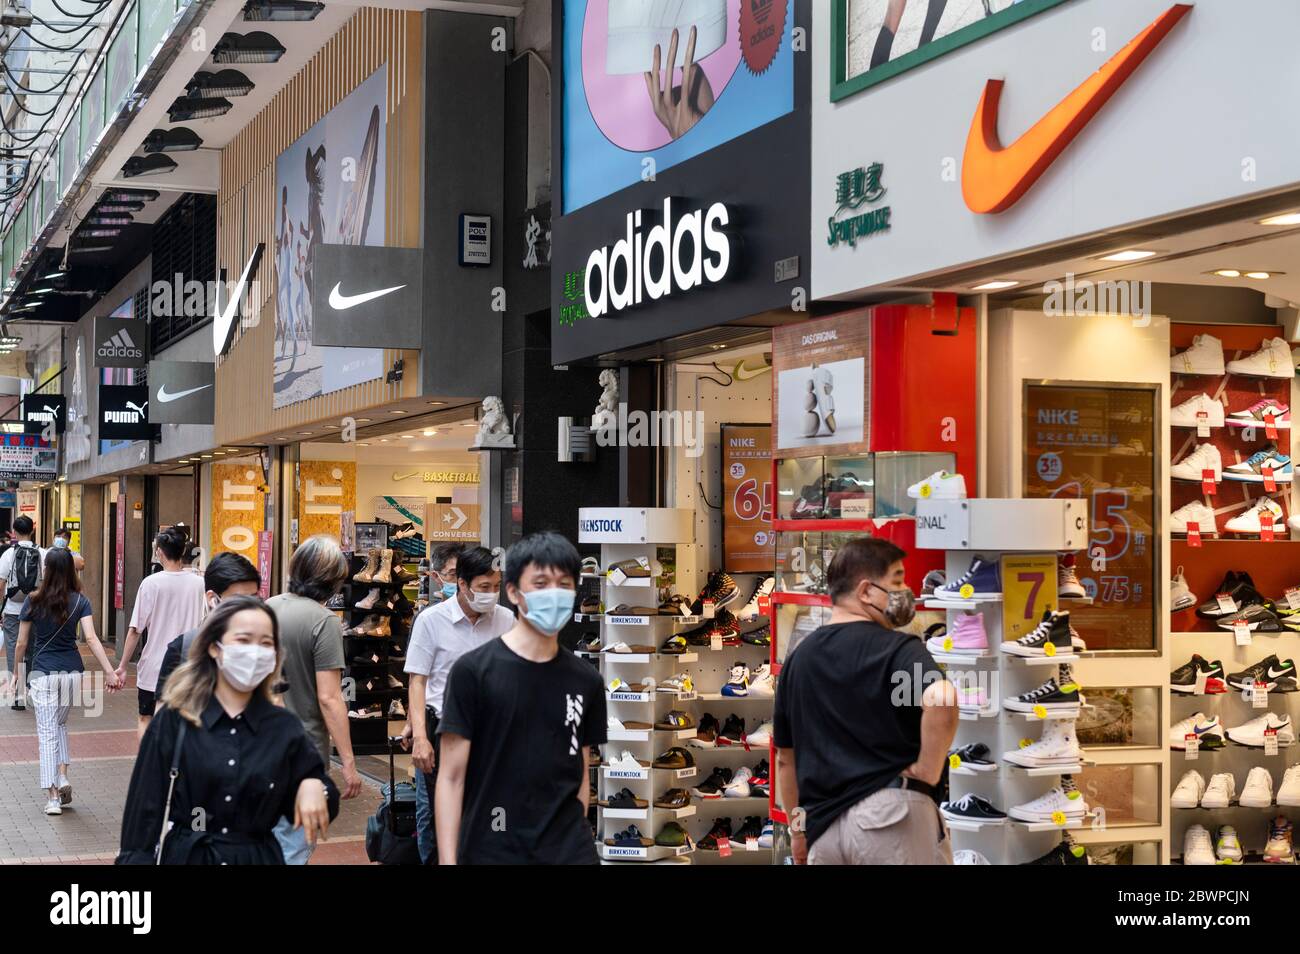 adidas and nike outlet